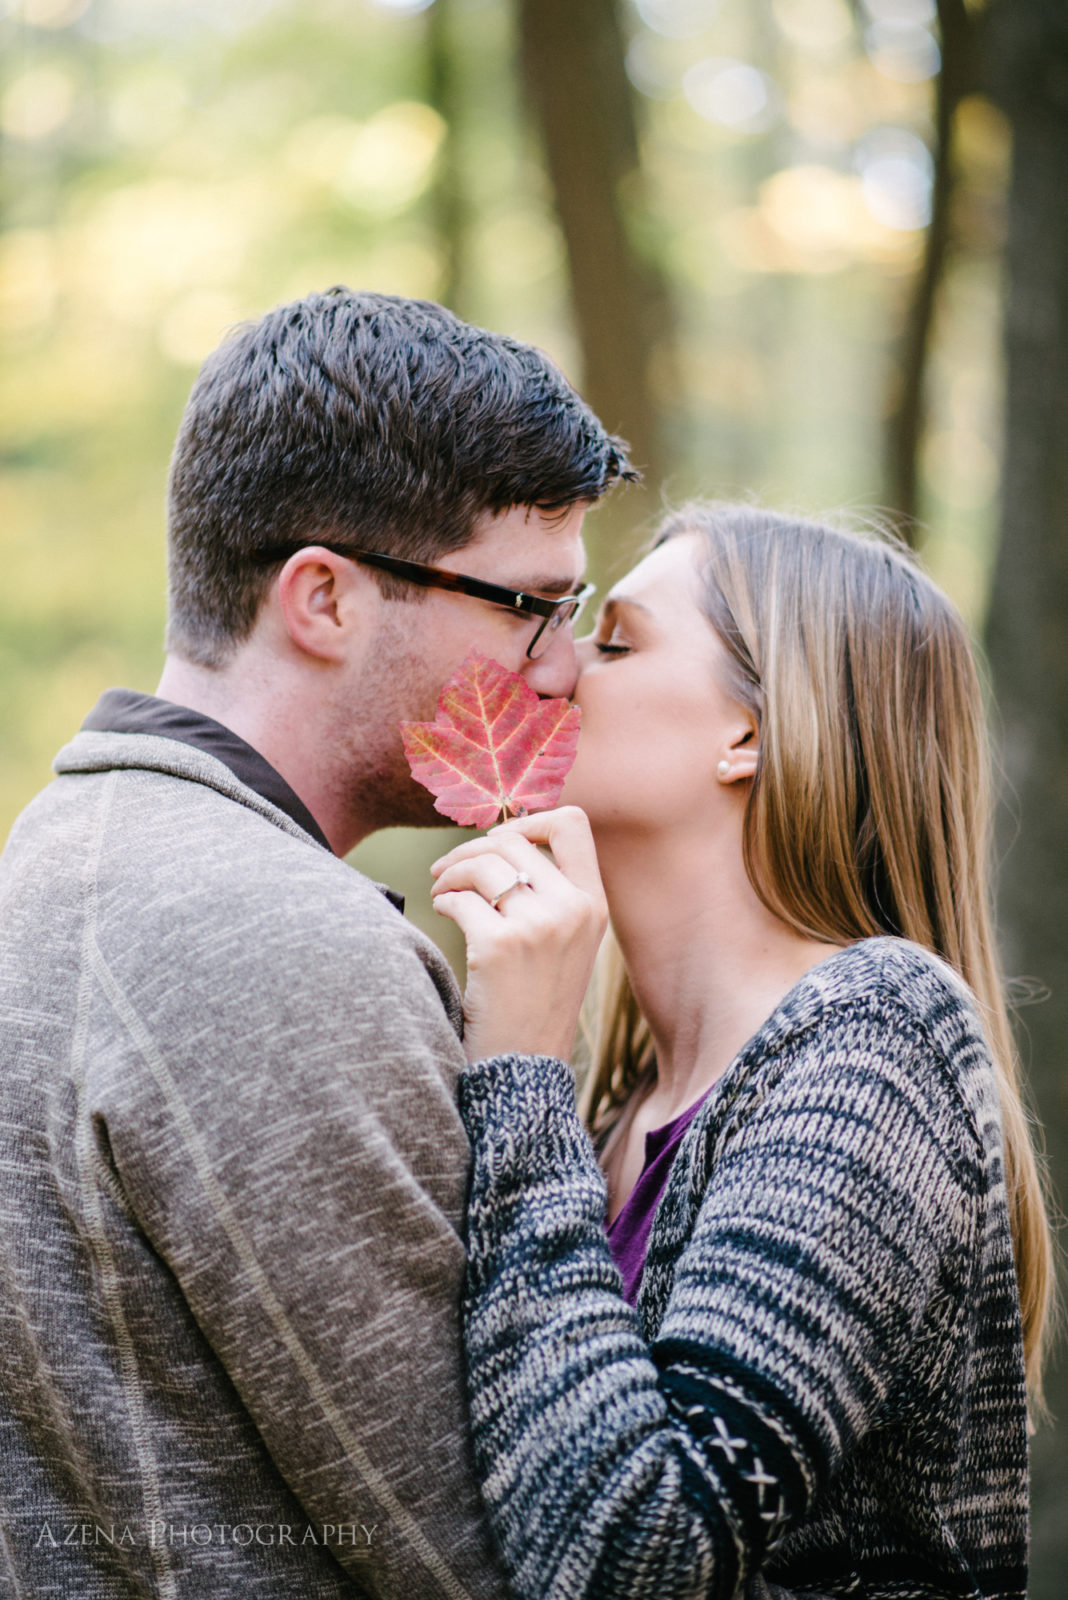 red leaf kiss. fall engagement session at devil's lake state park